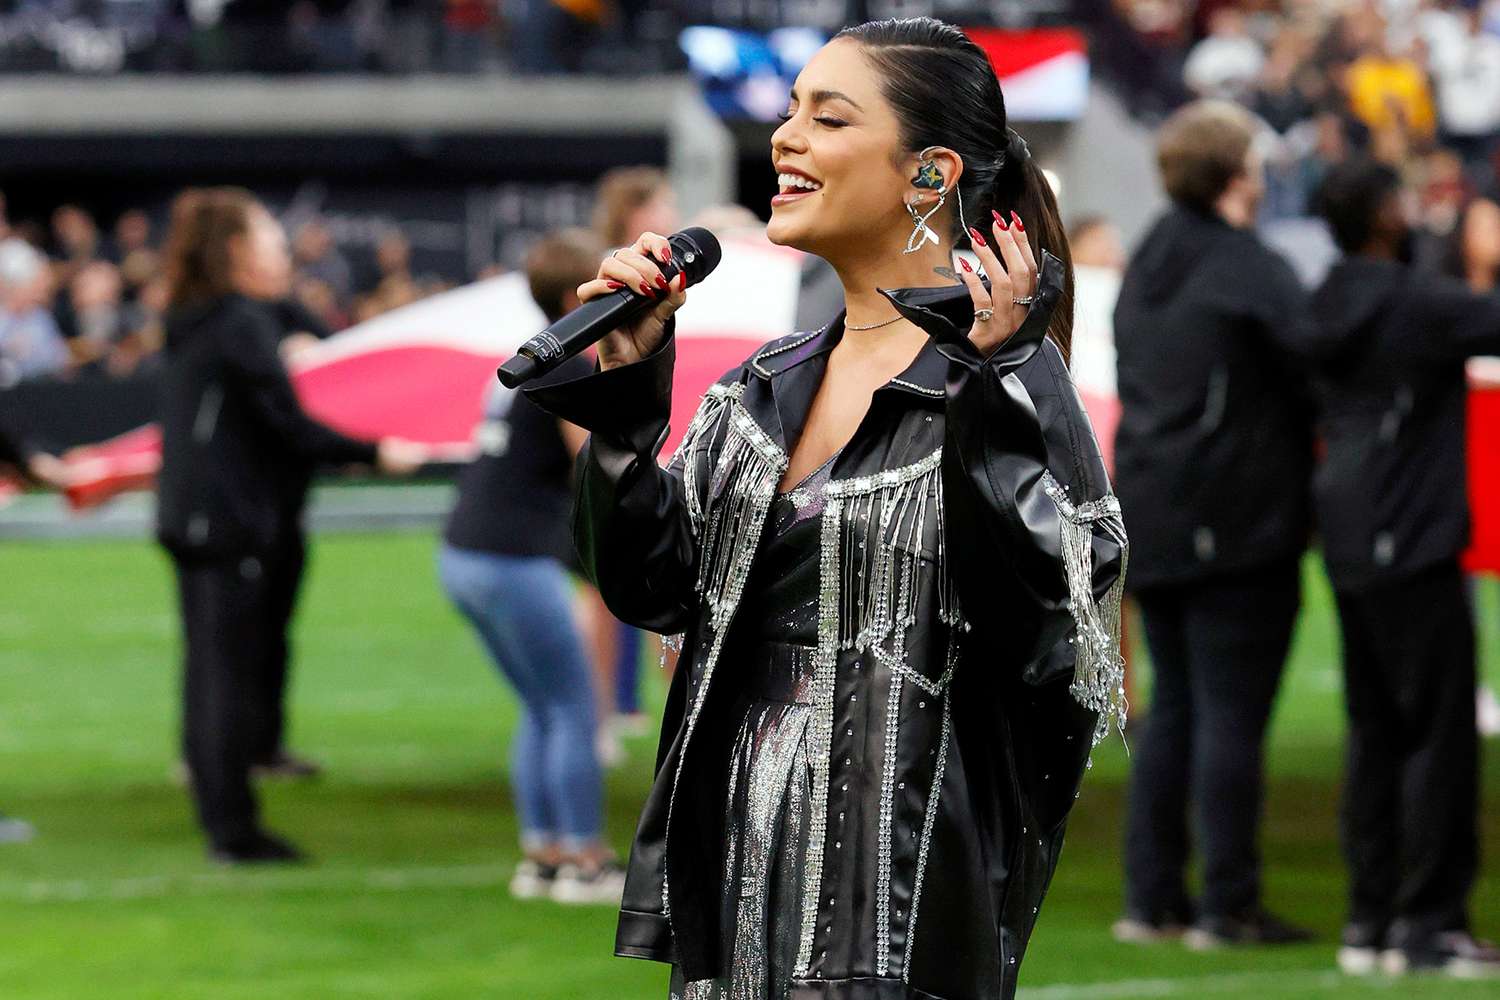 LAS VEGAS, NEVADA - DECEMBER 05: Actress/singer Vanessa Hudgens performs the American national anthem before a game between the Washington Football Team and the Las Vegas Raiders at Allegiant Stadium on December 5, 2021 in Las Vegas, Nevada. The Washington Football Team defeated the Raiders 17-15. (Photo by Ethan Miller/Getty Images)